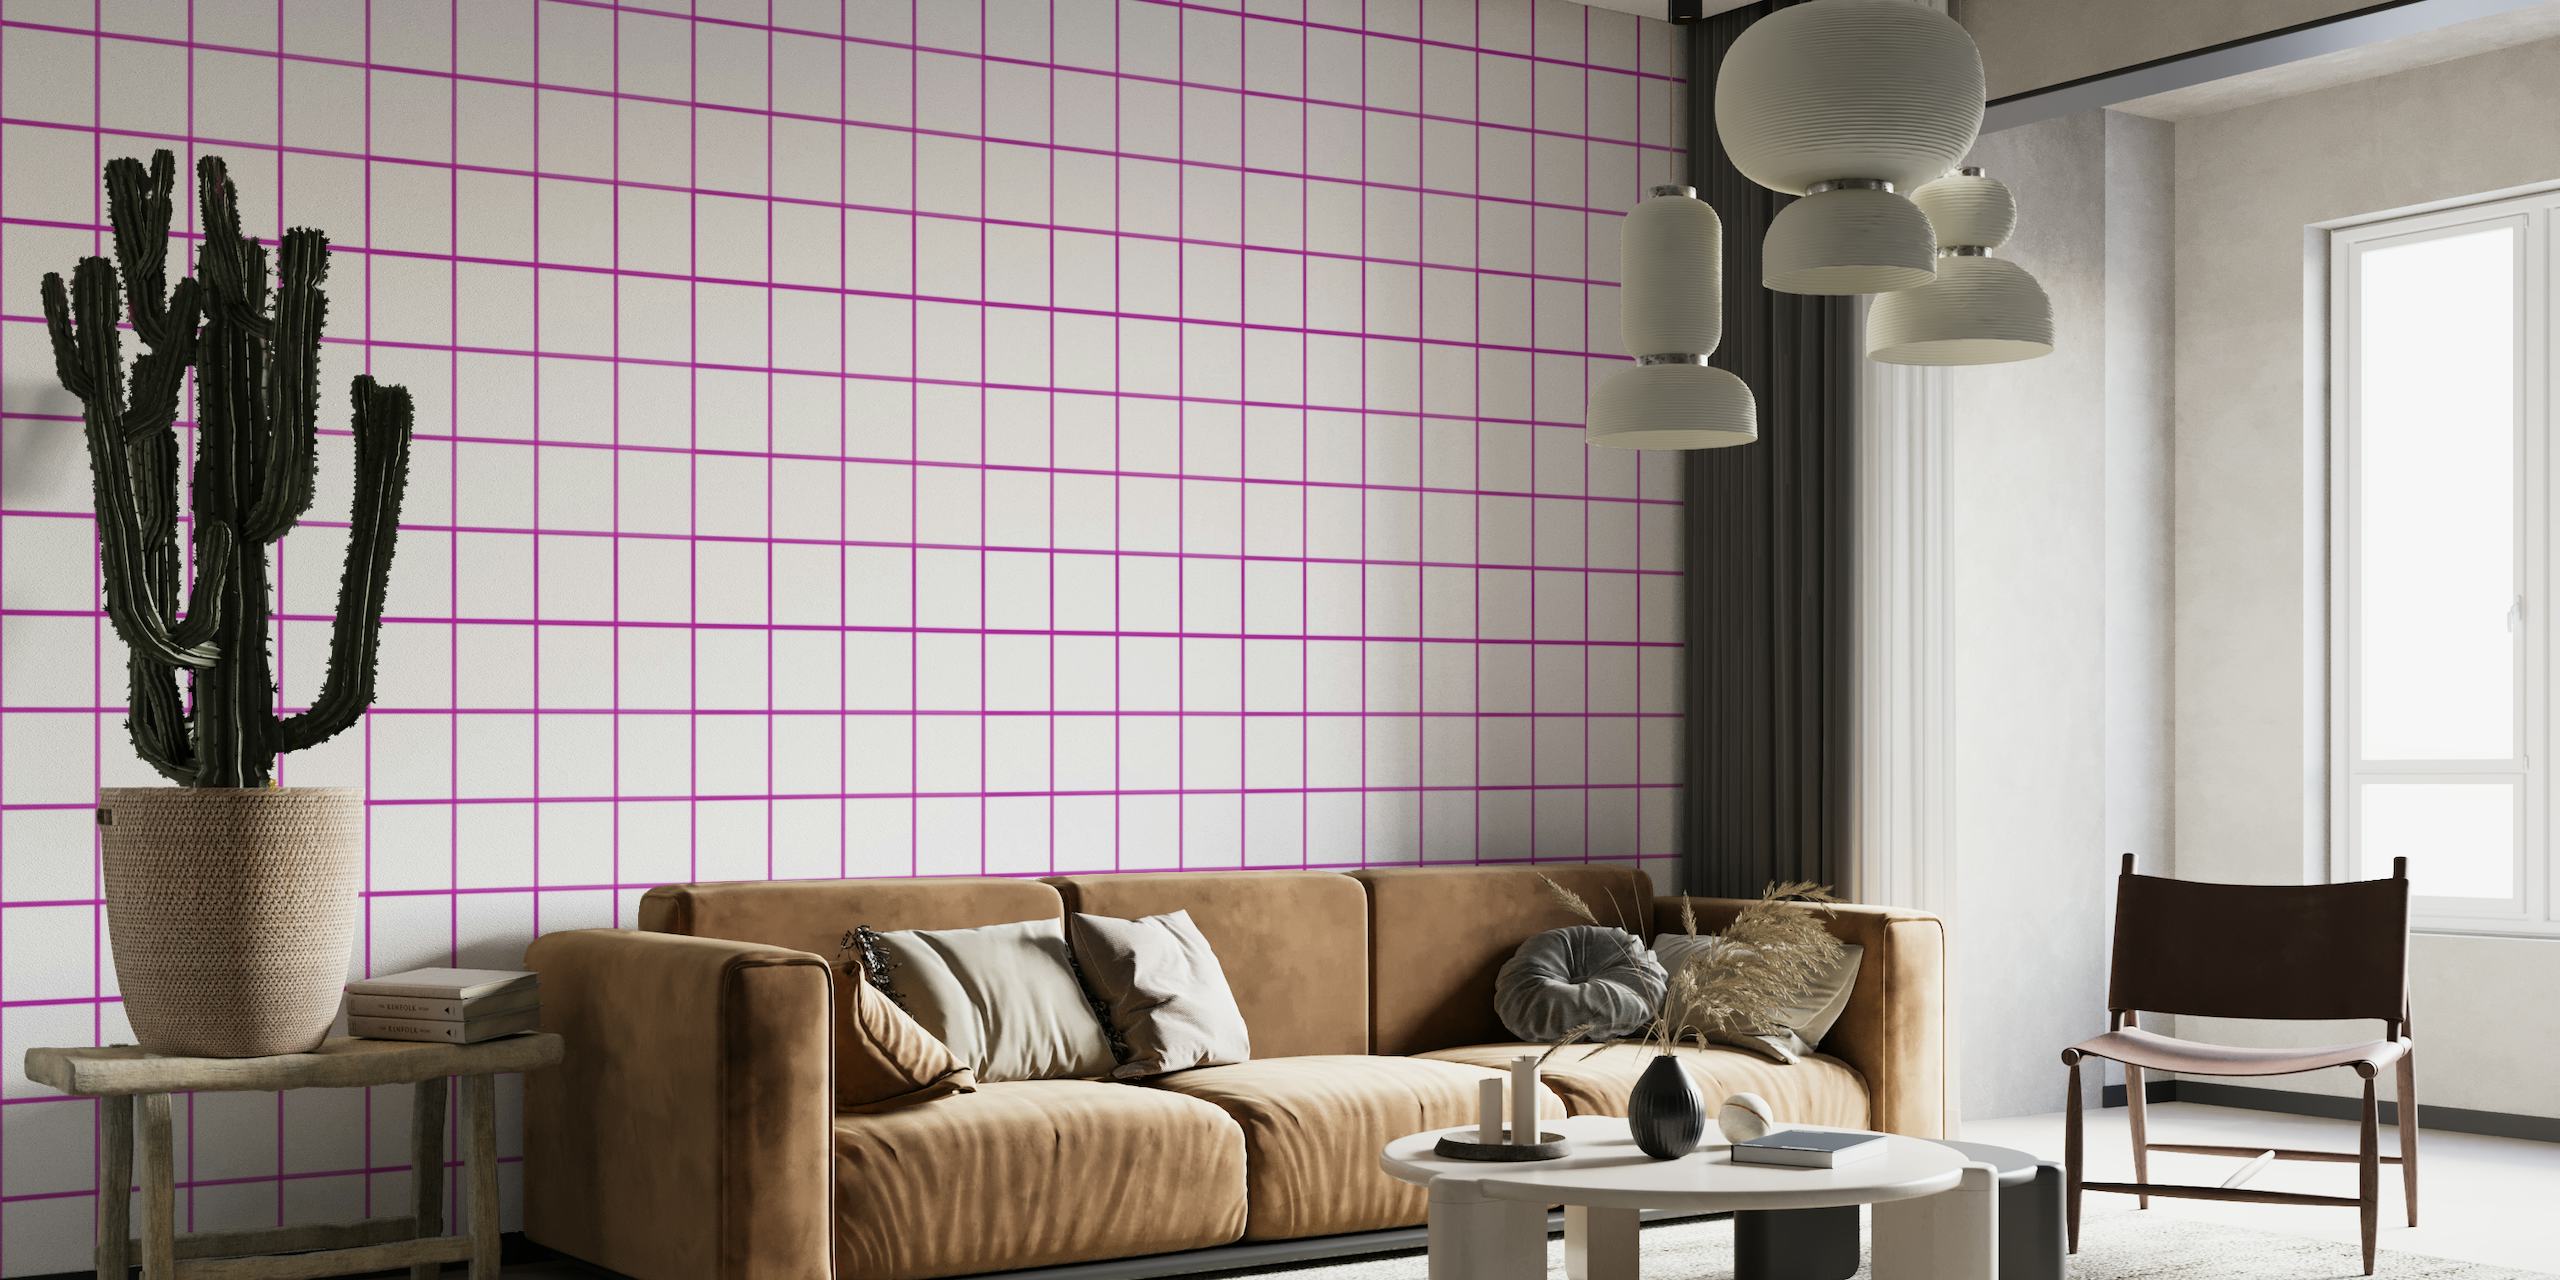 Purple grouted tiles wallpaper